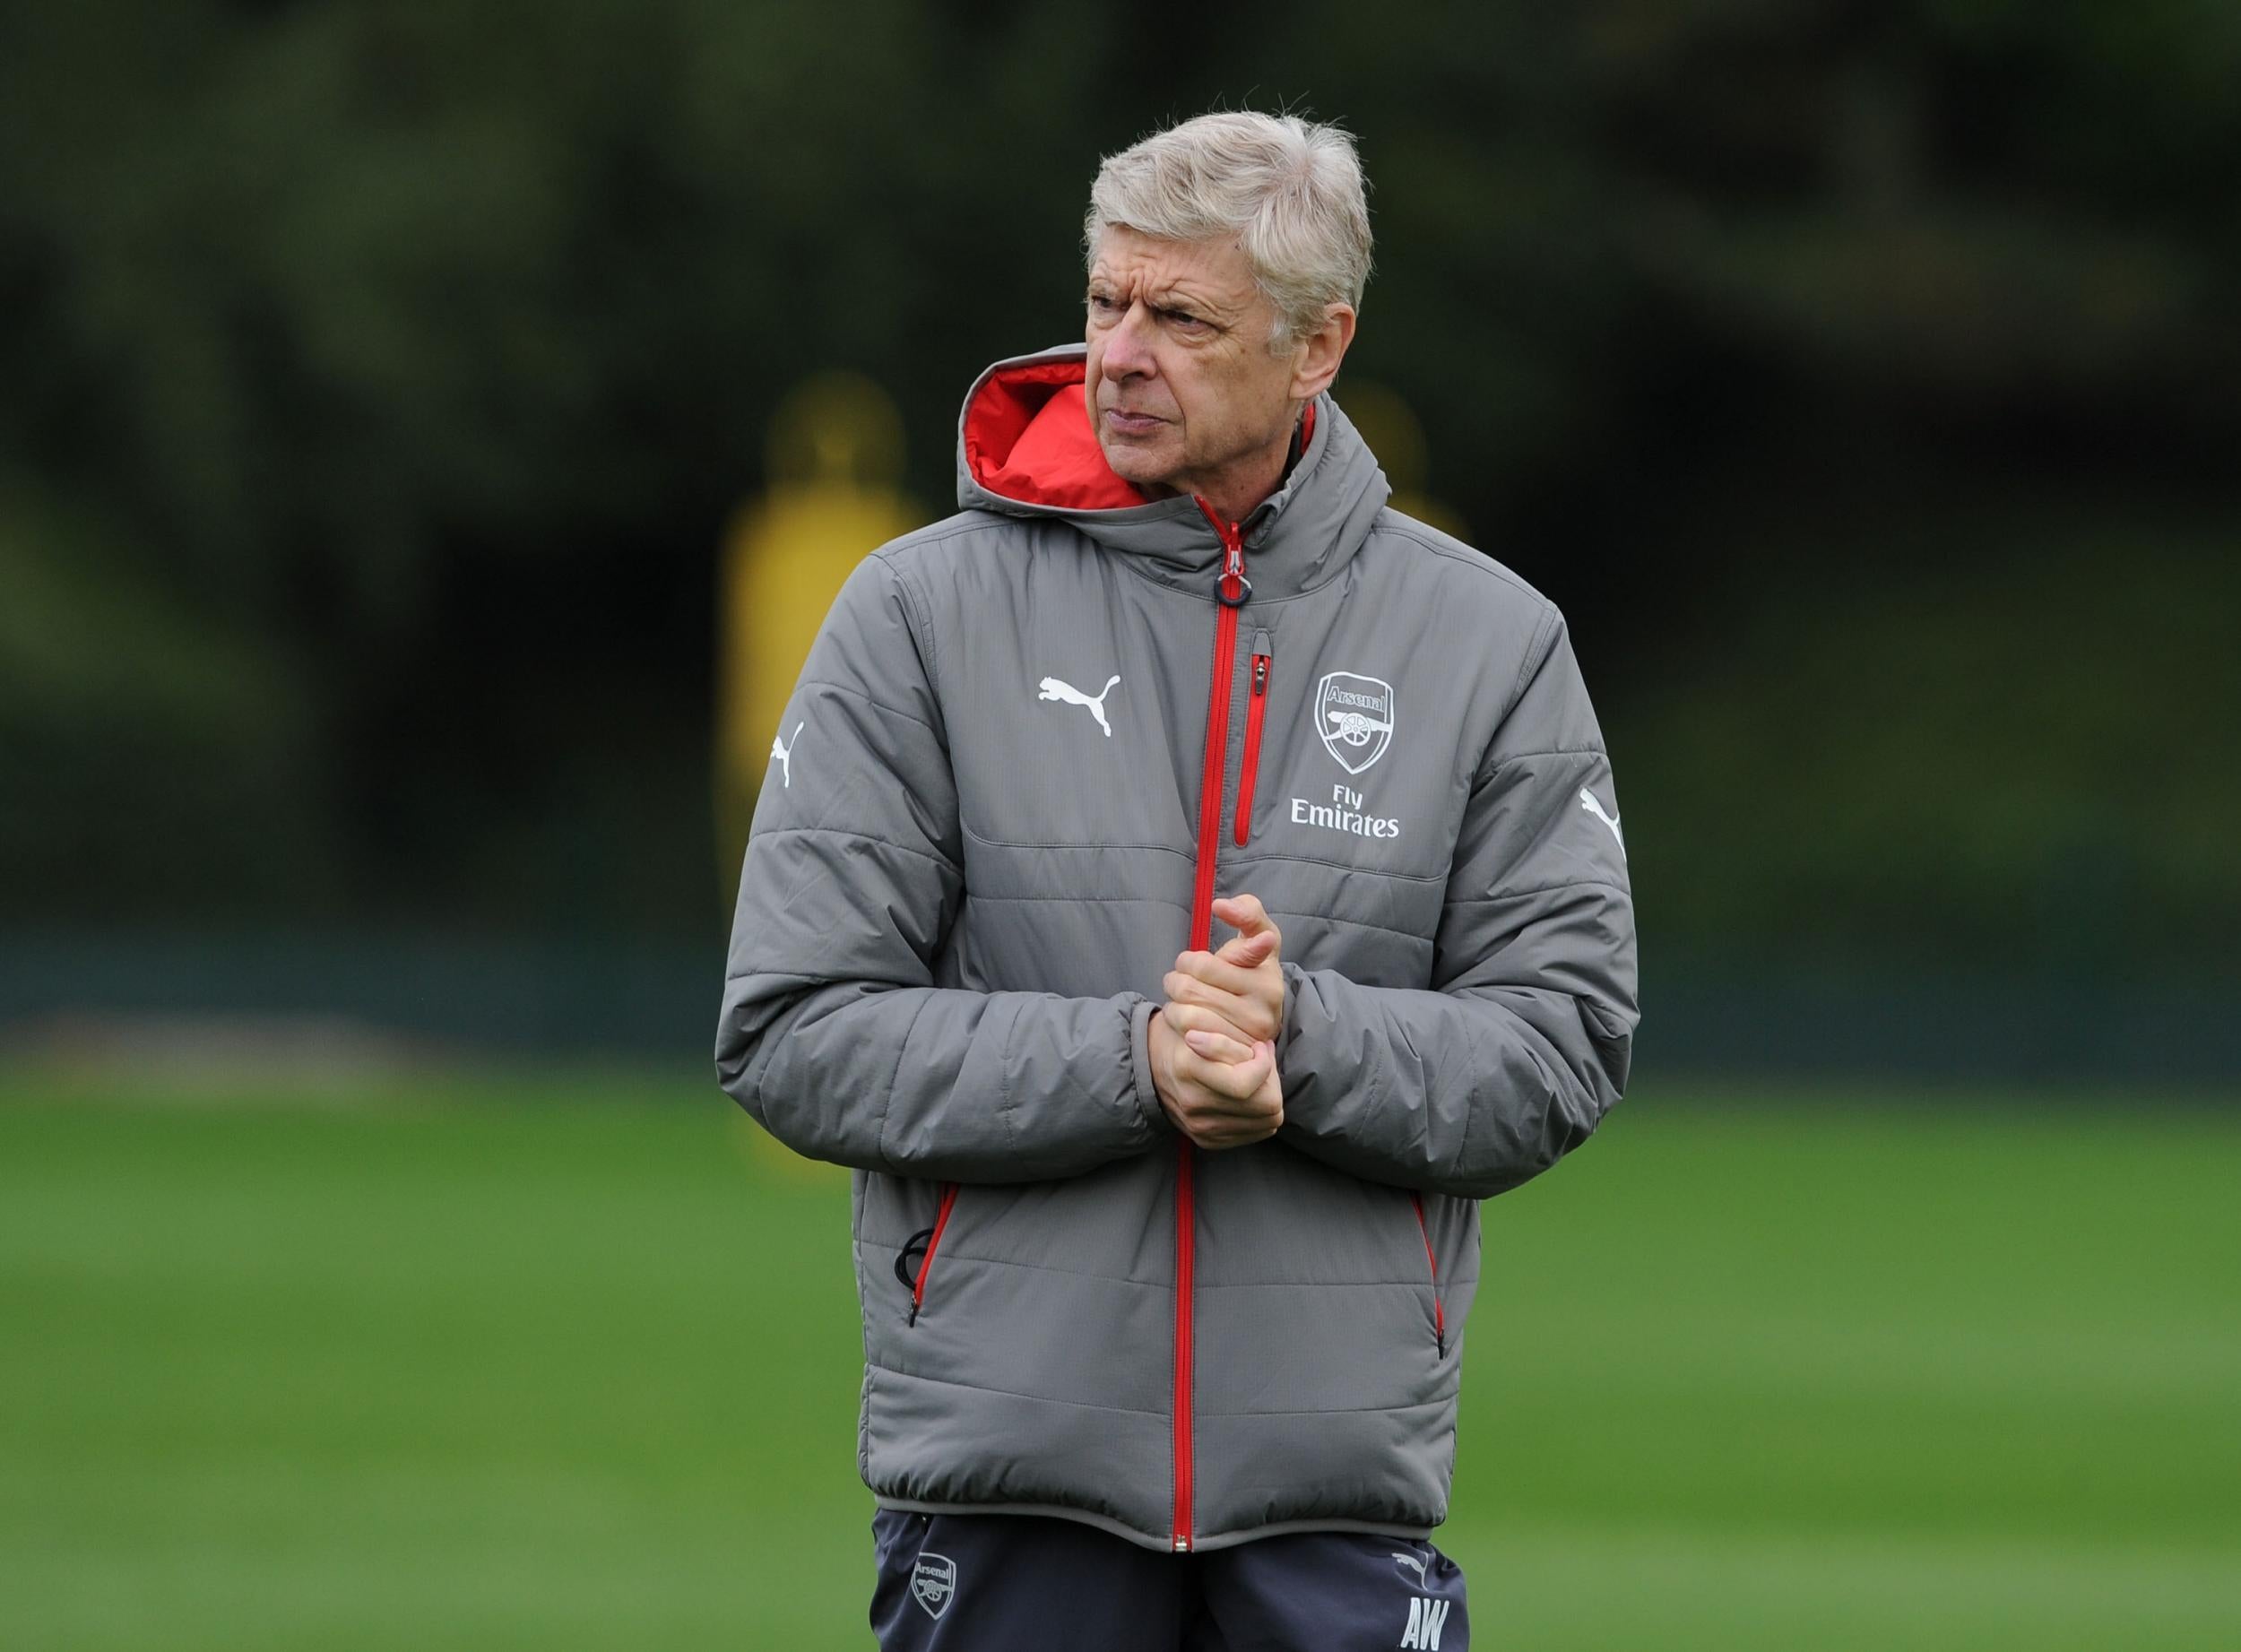 'We are consistent at the moment and I feel there is more to come out from our team,' said Wenger